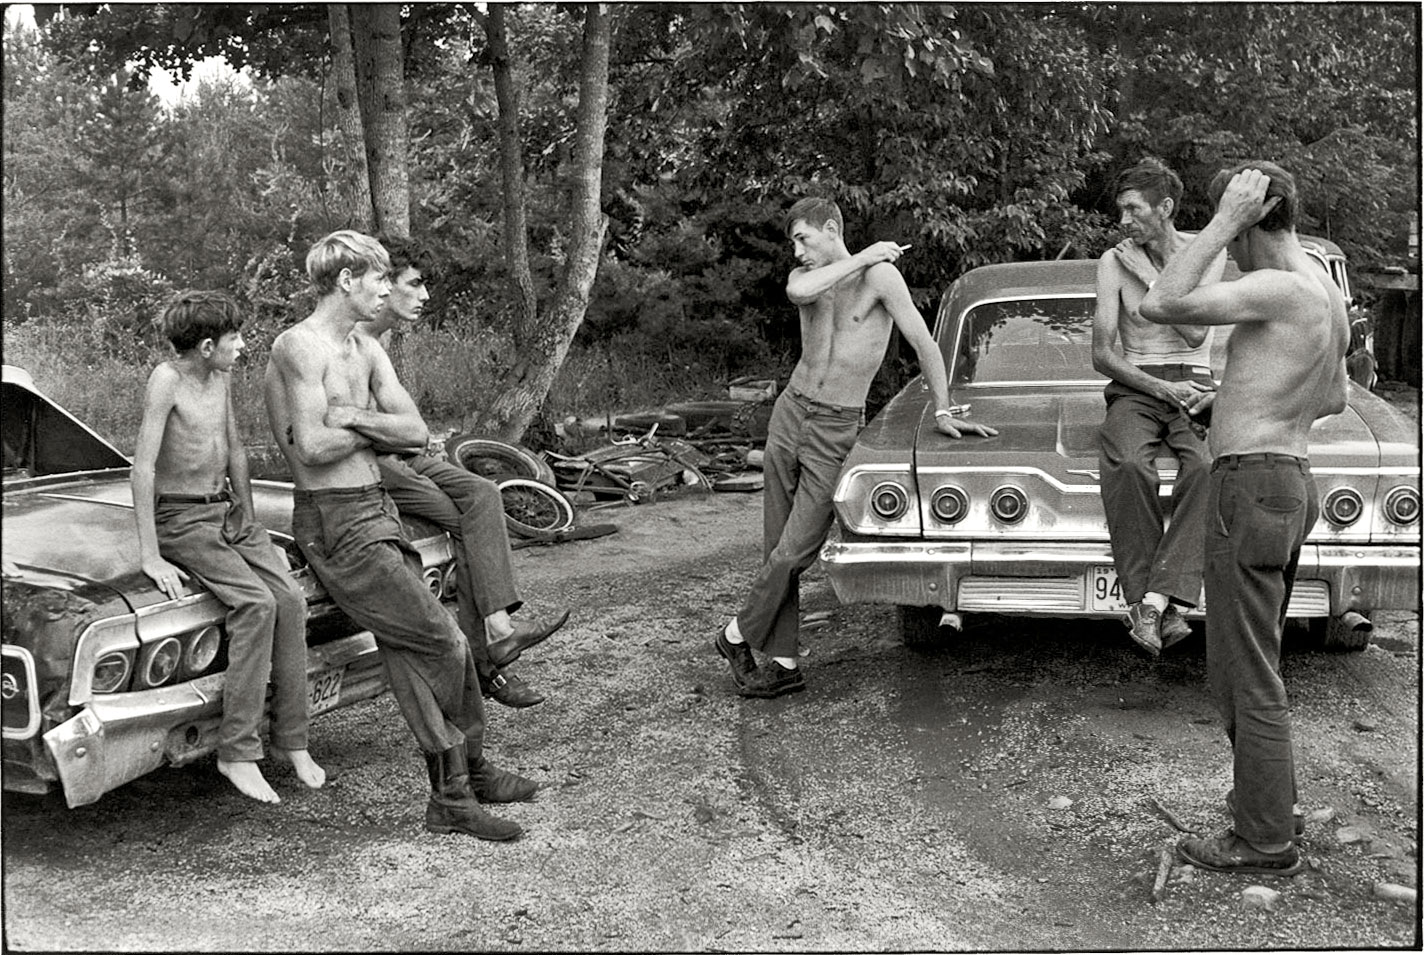 "Cornett family. Leatherwood, Kentucky, 1972. Men and boys without shirts sitting and standing around two cars." Willie Cornett (seated, right) and some of his 12 children. 35mm negative by William Gedney (1932-1989). From Duke University's  Gedney Collection, encompassing some 5,000 pictures taken from the 1950s through the early '70s. Do we want to see more? View full size.